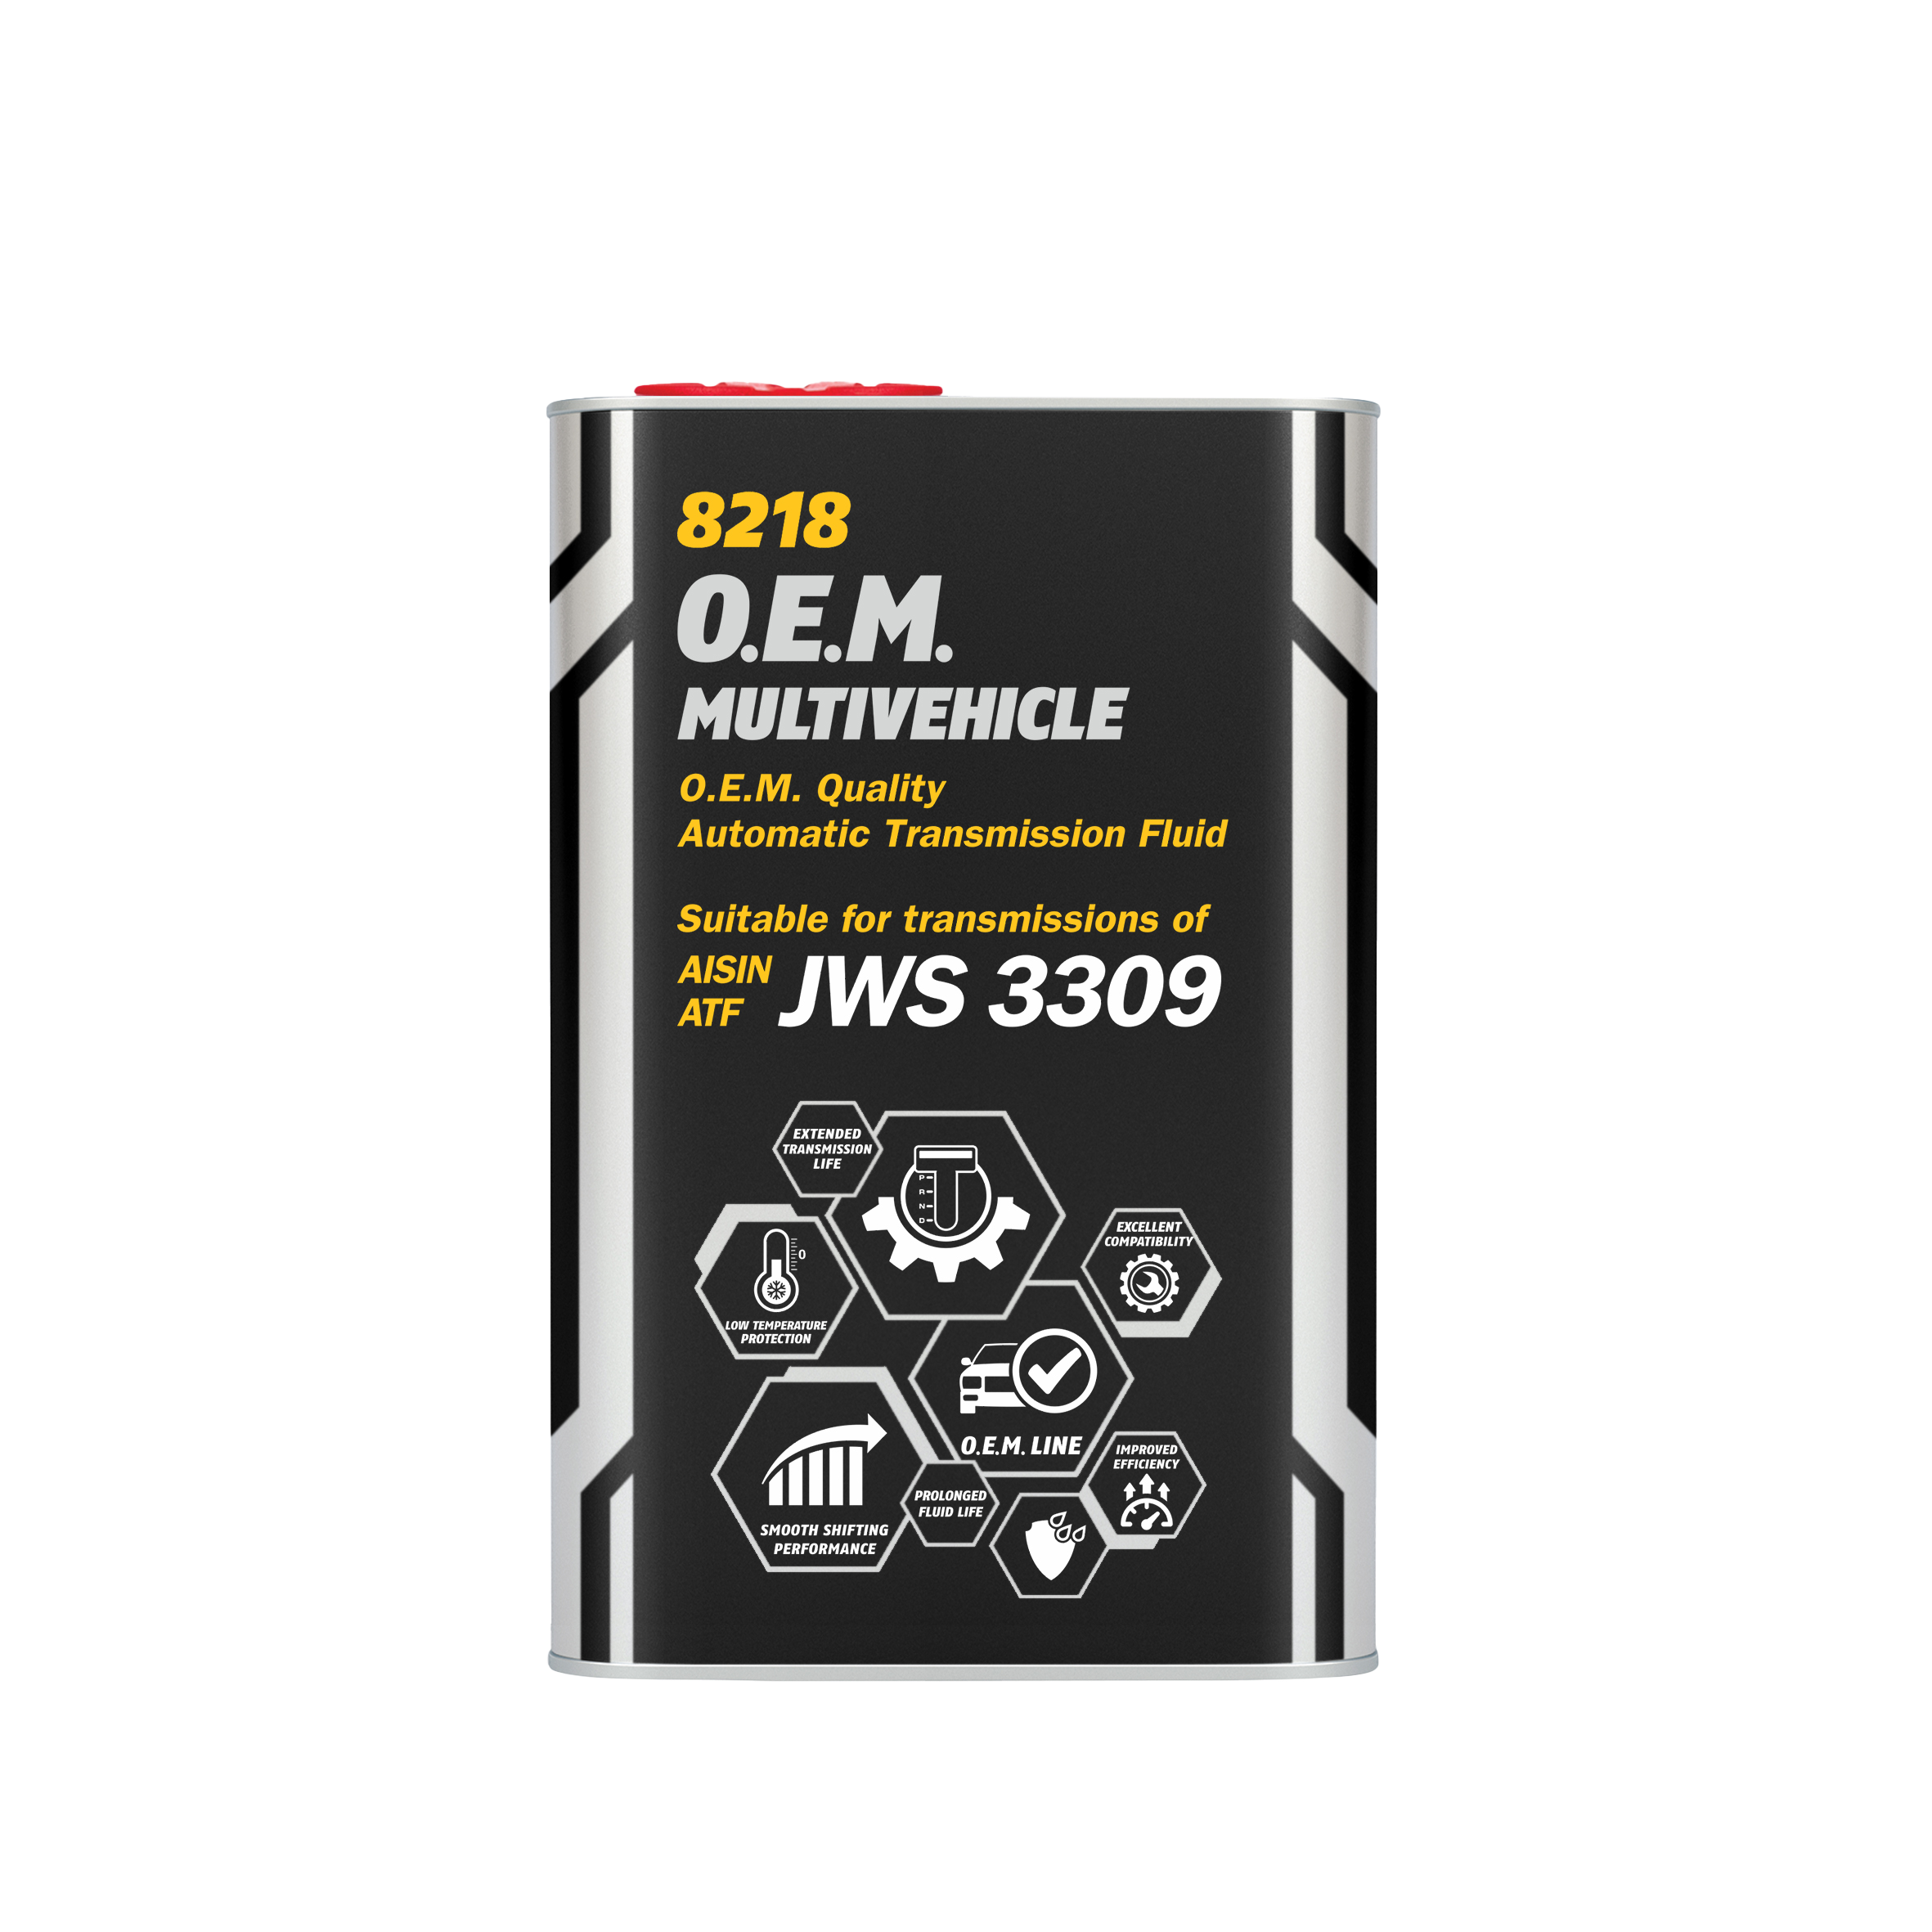 MANNOL 5W-40 EXTREME - Synthetic Engine Oil Selangor, Malaysia, Kuala  Lumpur (KL), Klang Supplier, Suppliers, Supply, Supplies